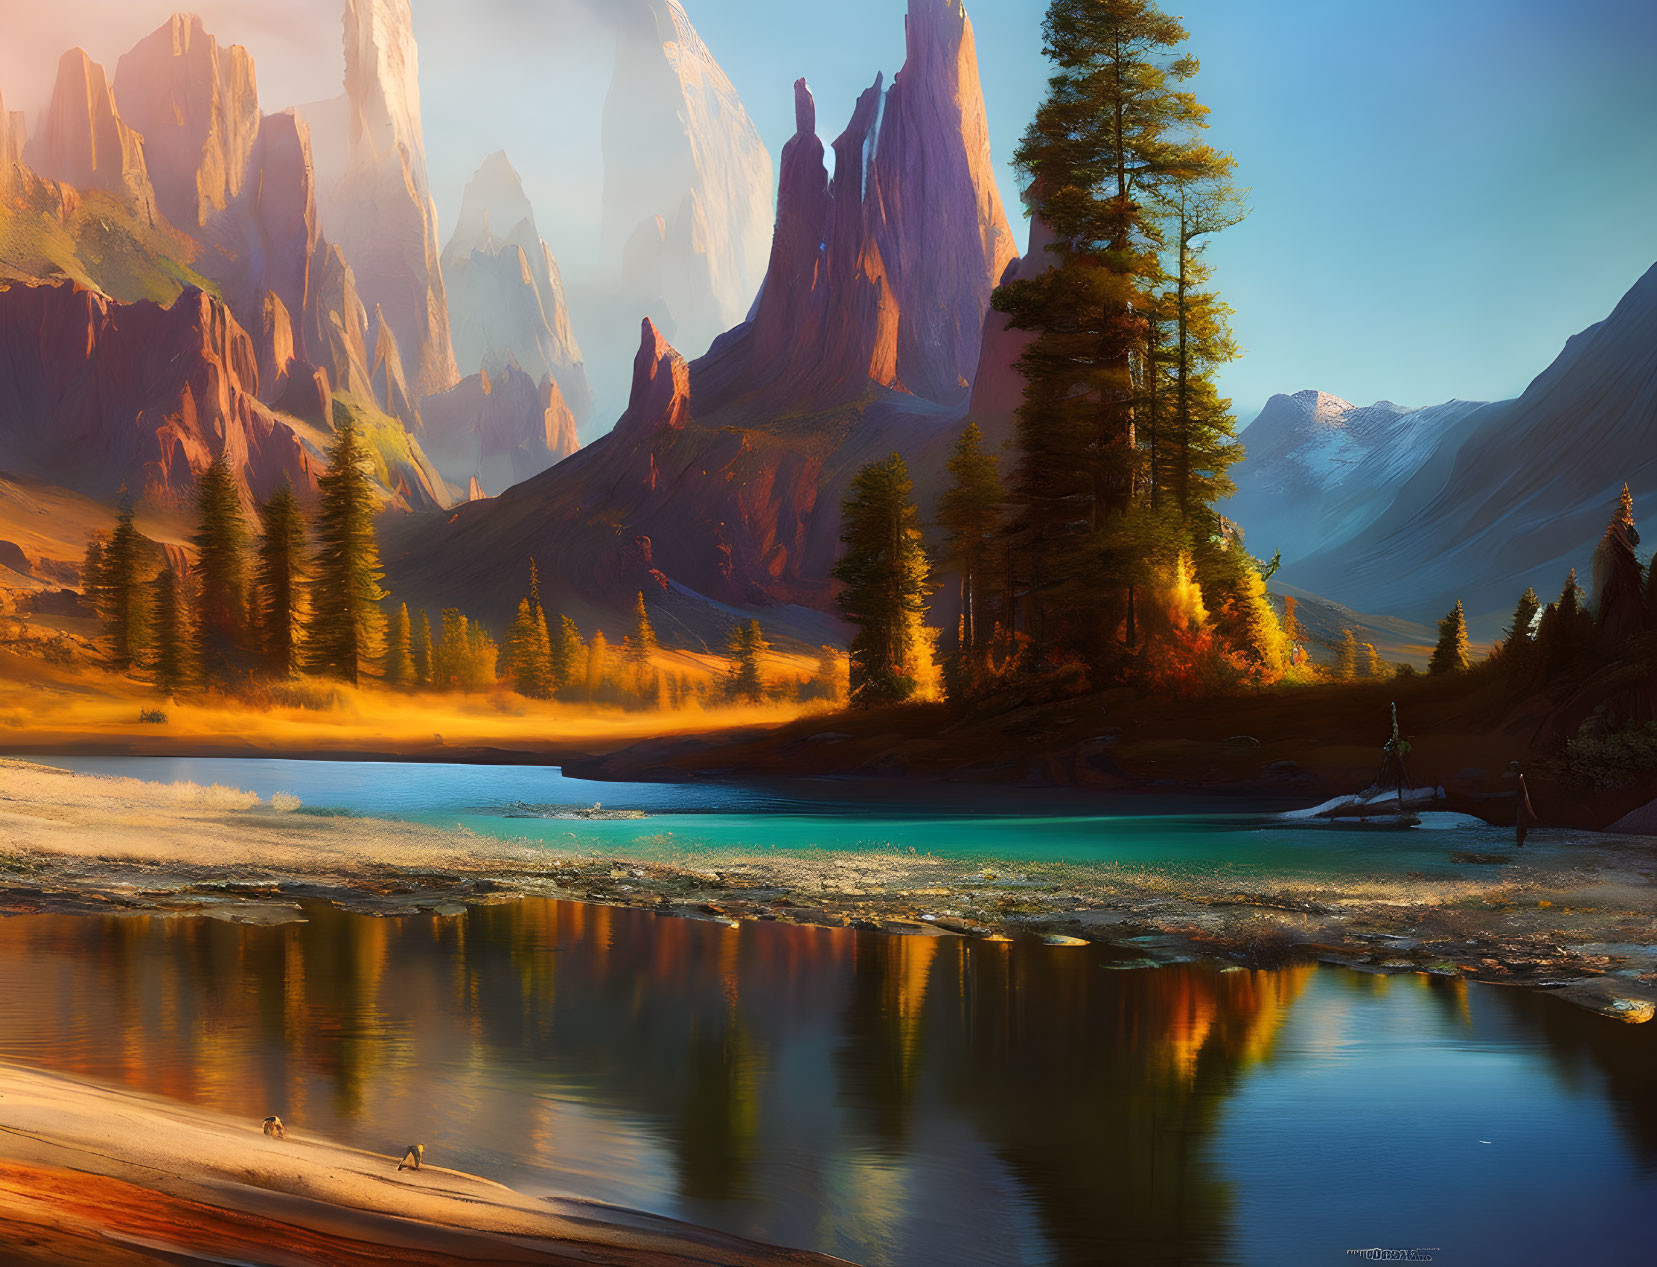 Tranquil landscape with turquoise lake, pine trees, towering cliffs